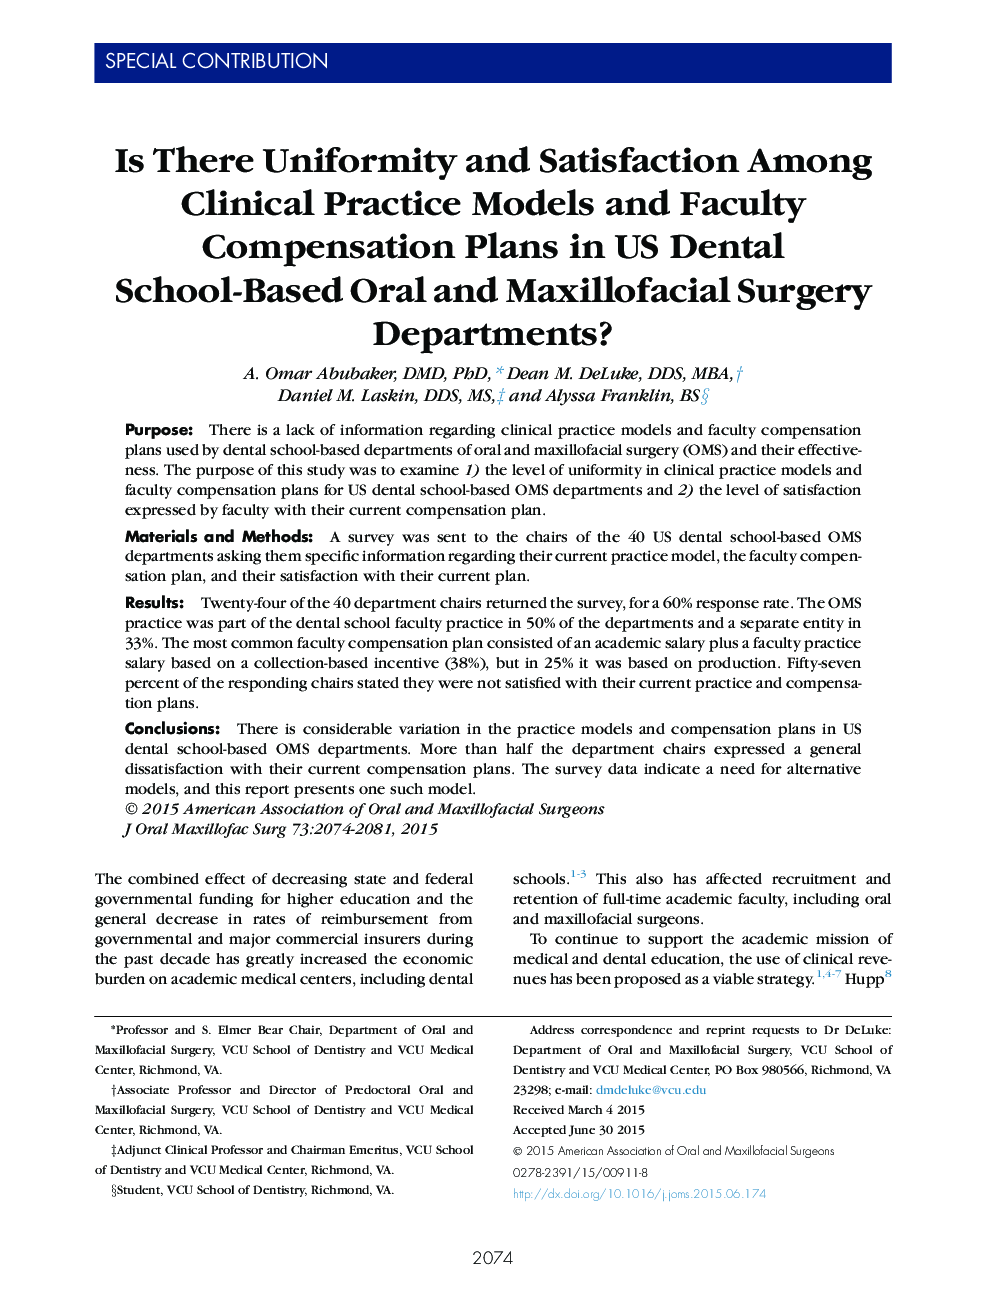 Is There Uniformity and Satisfaction Among Clinical Practice Models and Faculty Compensation Plans in US Dental School-Based Oral and Maxillofacial Surgery Departments?